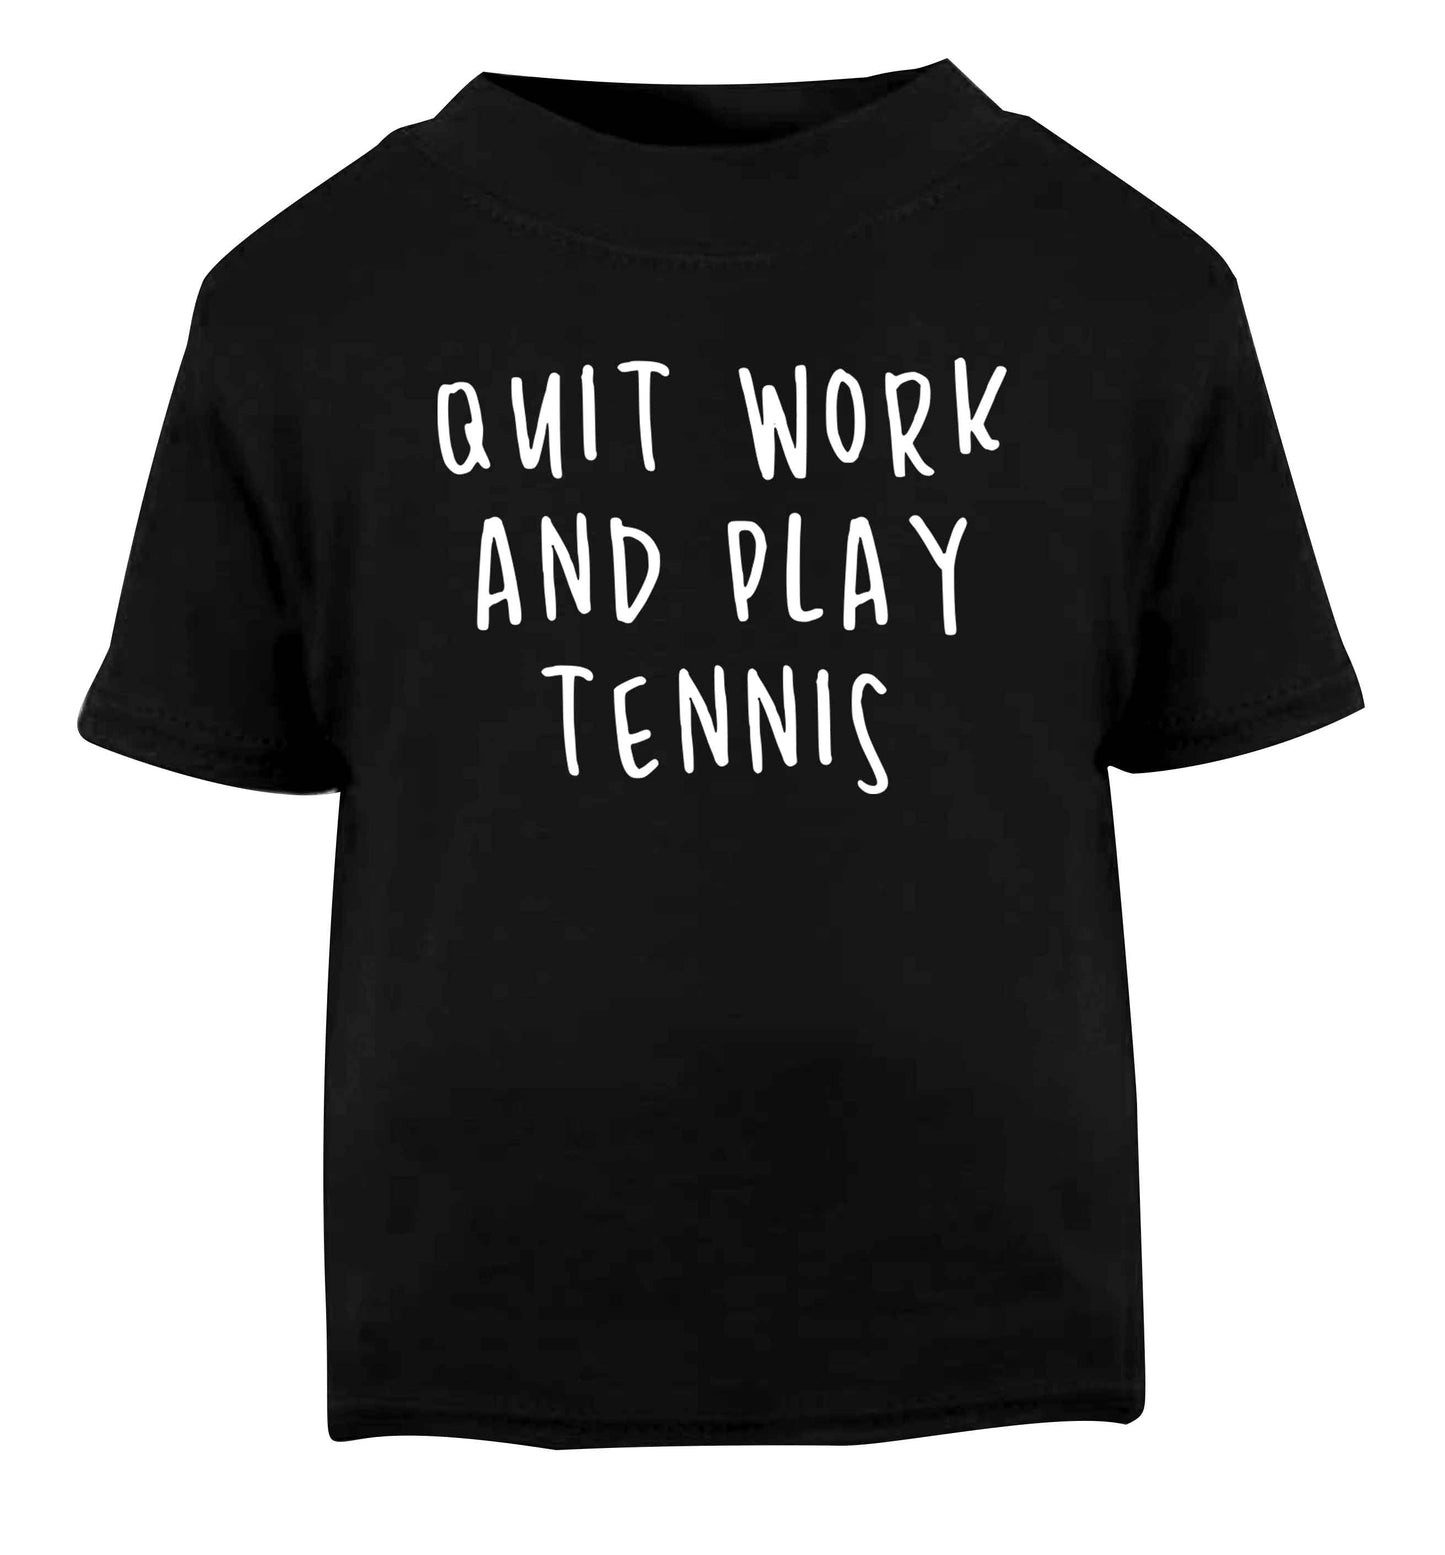 Quit work and play tennis Black Baby Toddler Tshirt 2 years